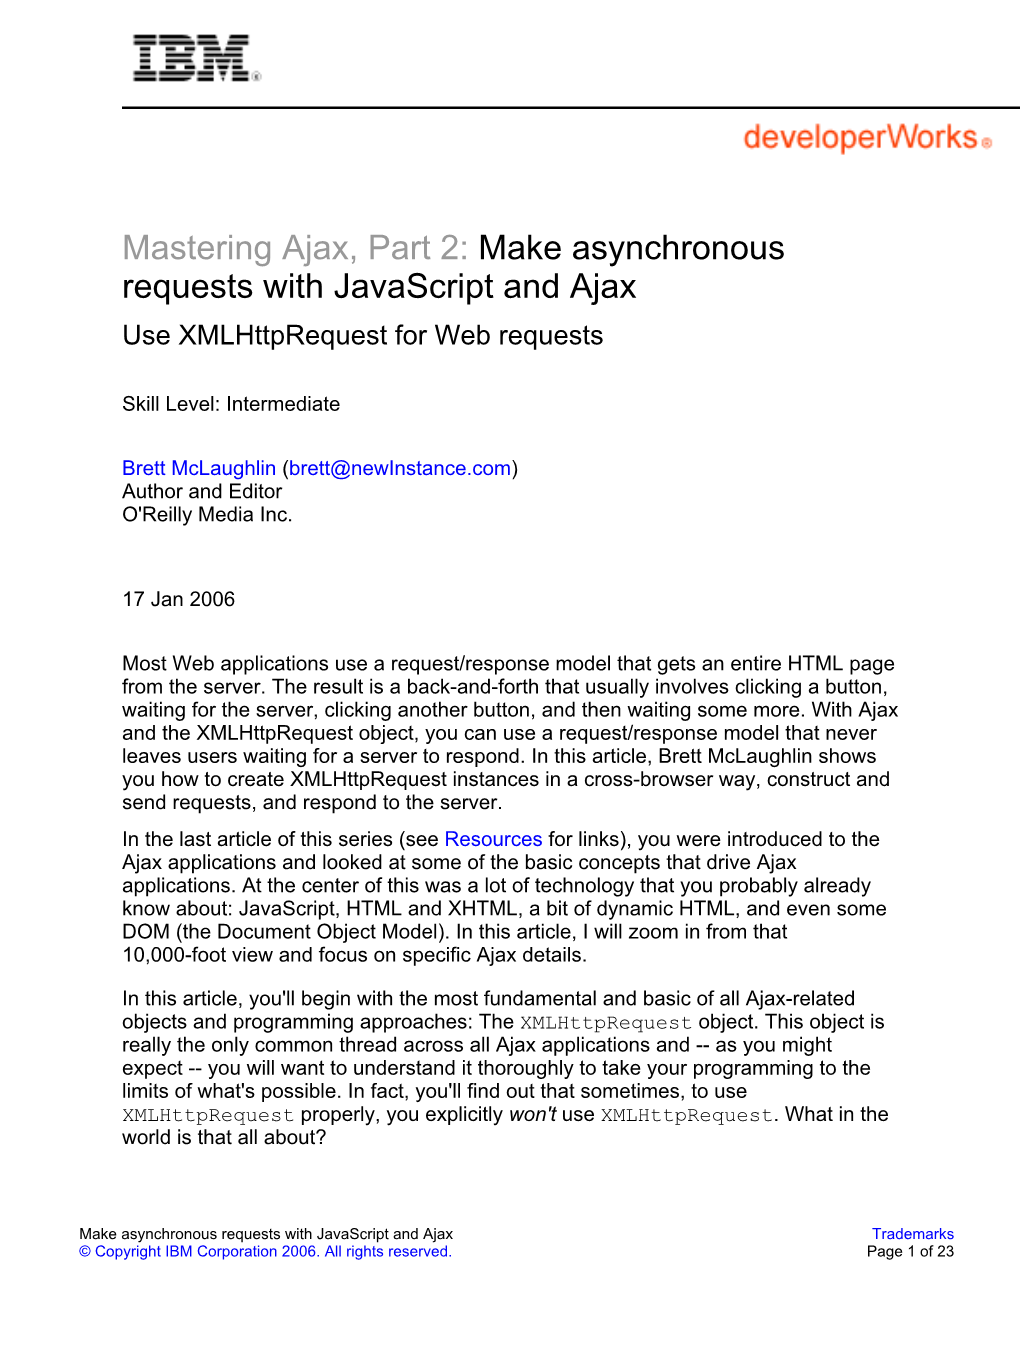 Make Asynchronous Requests with Javascript and Ajax Use Xmlhttprequest for Web Requests